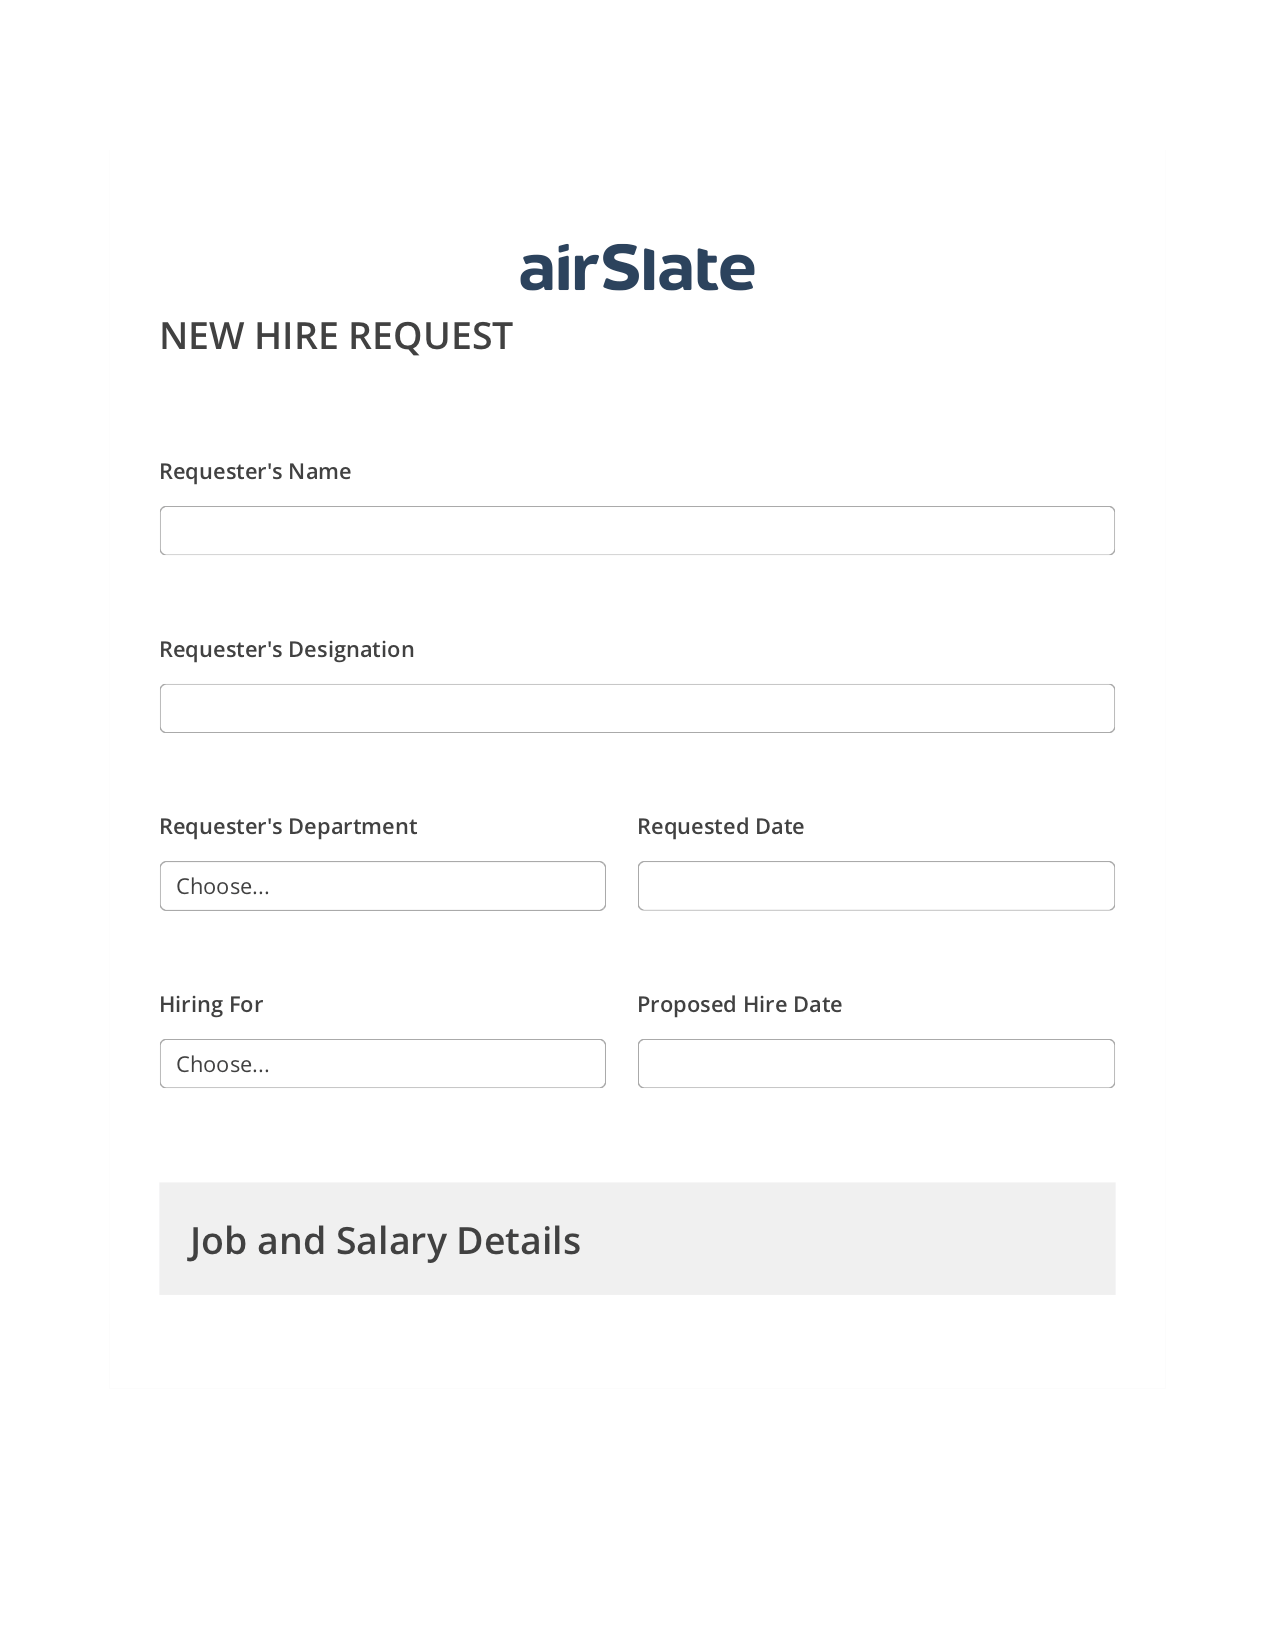 Hiring Request Workflow Pre-fill Dropdowns from Smartsheet Bot, System Bot - Create a Slate in another Flow, Slack Two-Way Binding Bot